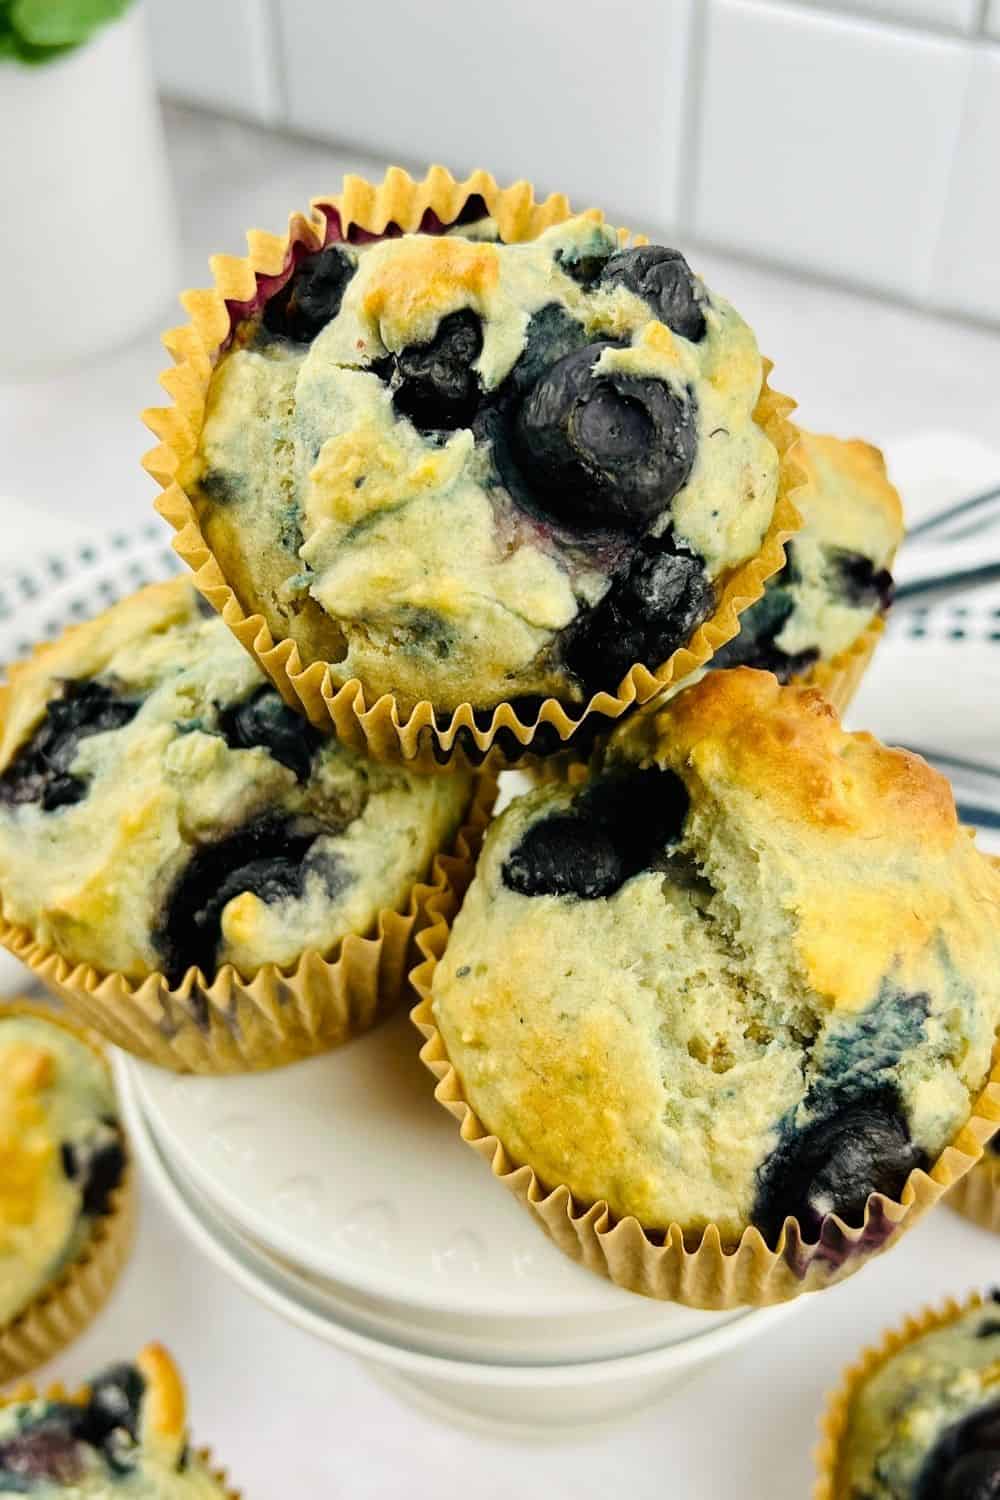 https://www.midlifehealthyliving.com/wp-content/uploads/2023/11/WW-blueberry-muffins-final.jpg